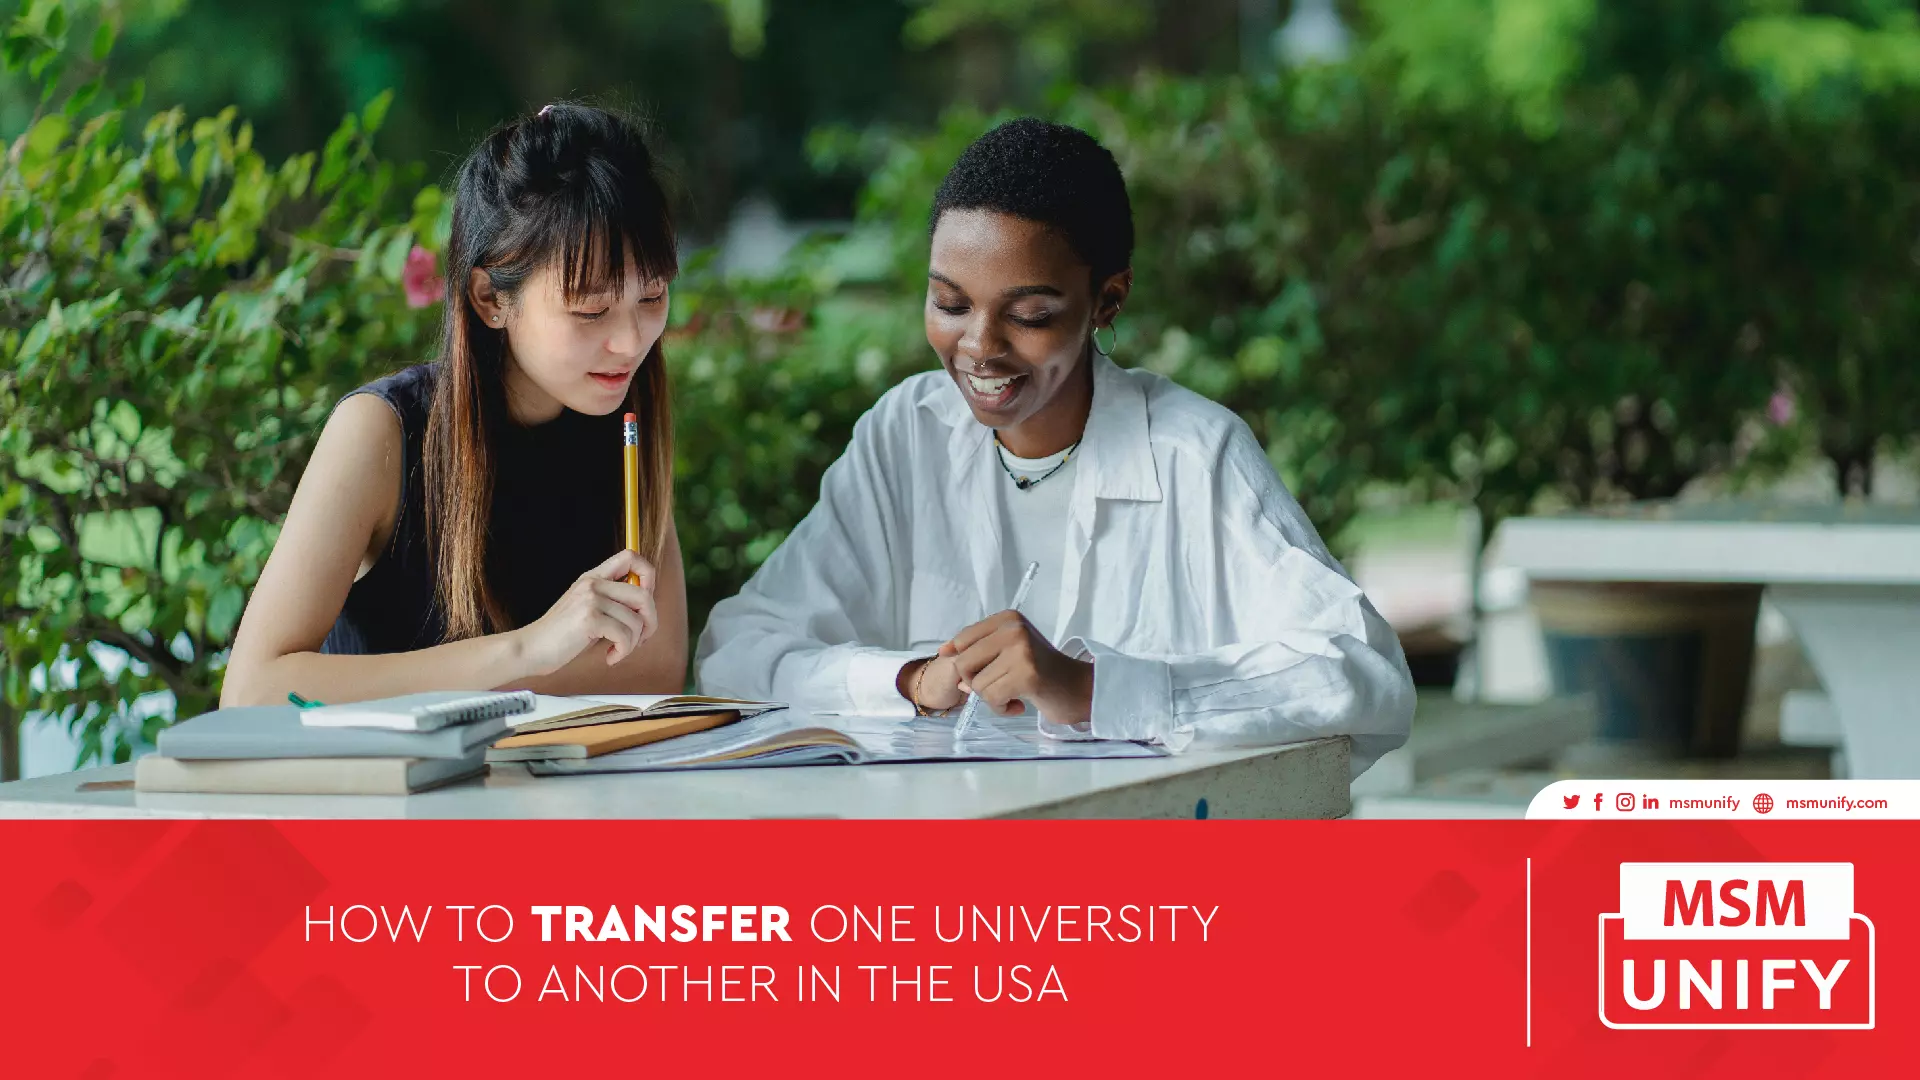 111422 MSM Unify How to Transfer From One University to Another in the USA 01